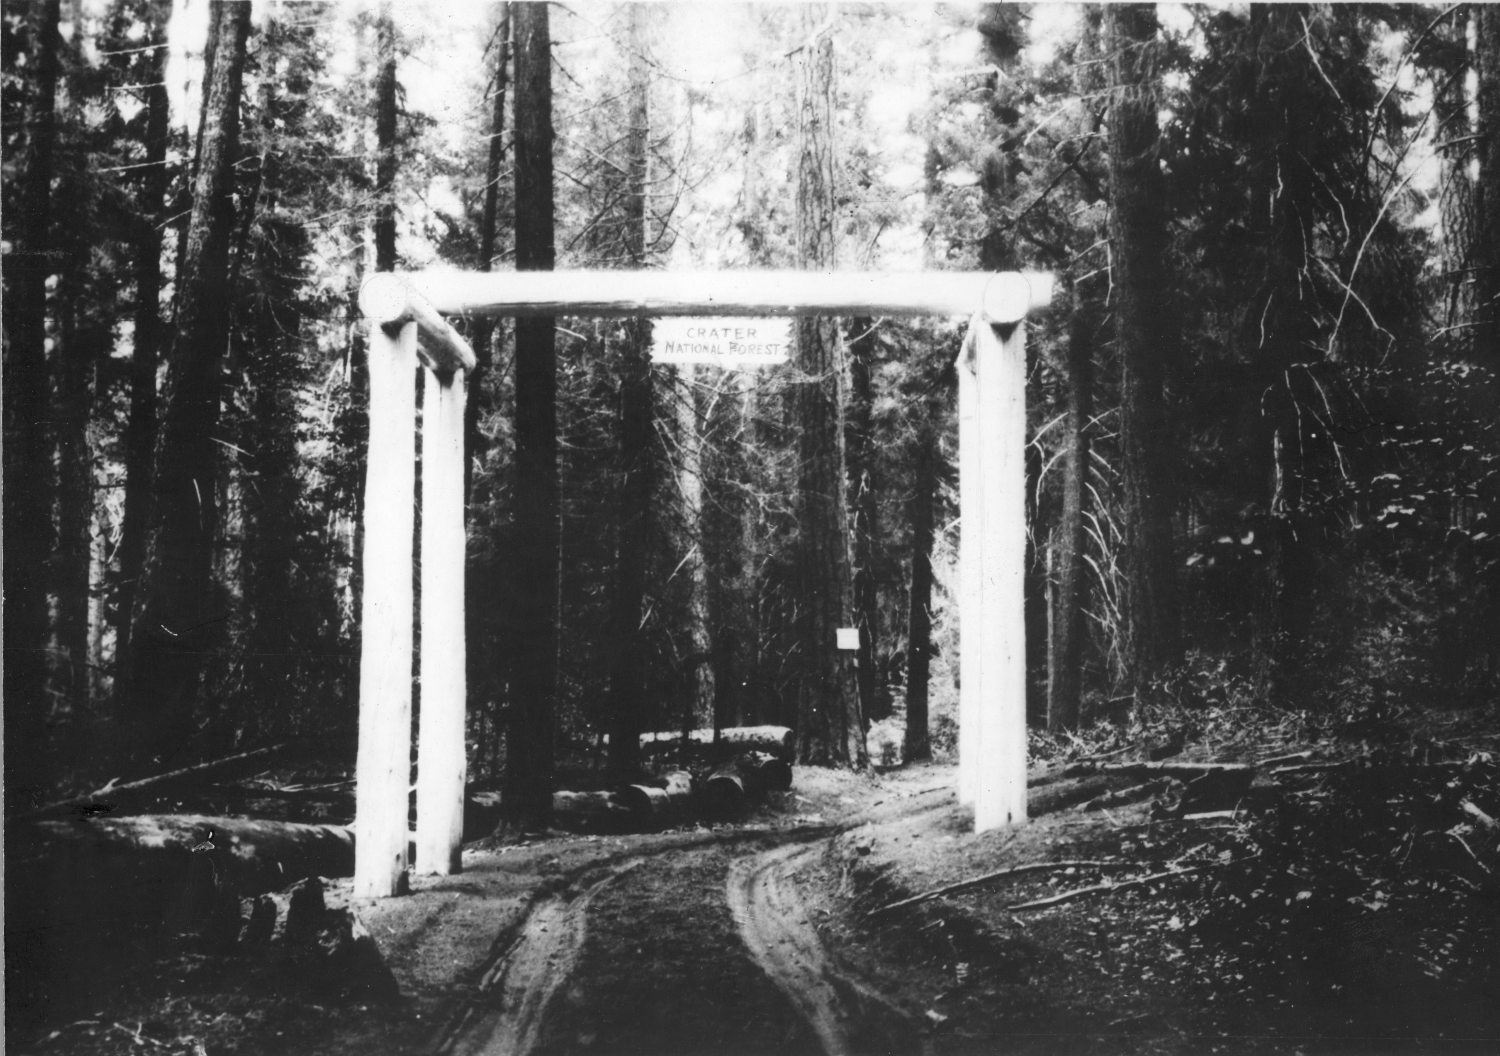 Crater Lake National Forest Boundary Sign, circa 1937